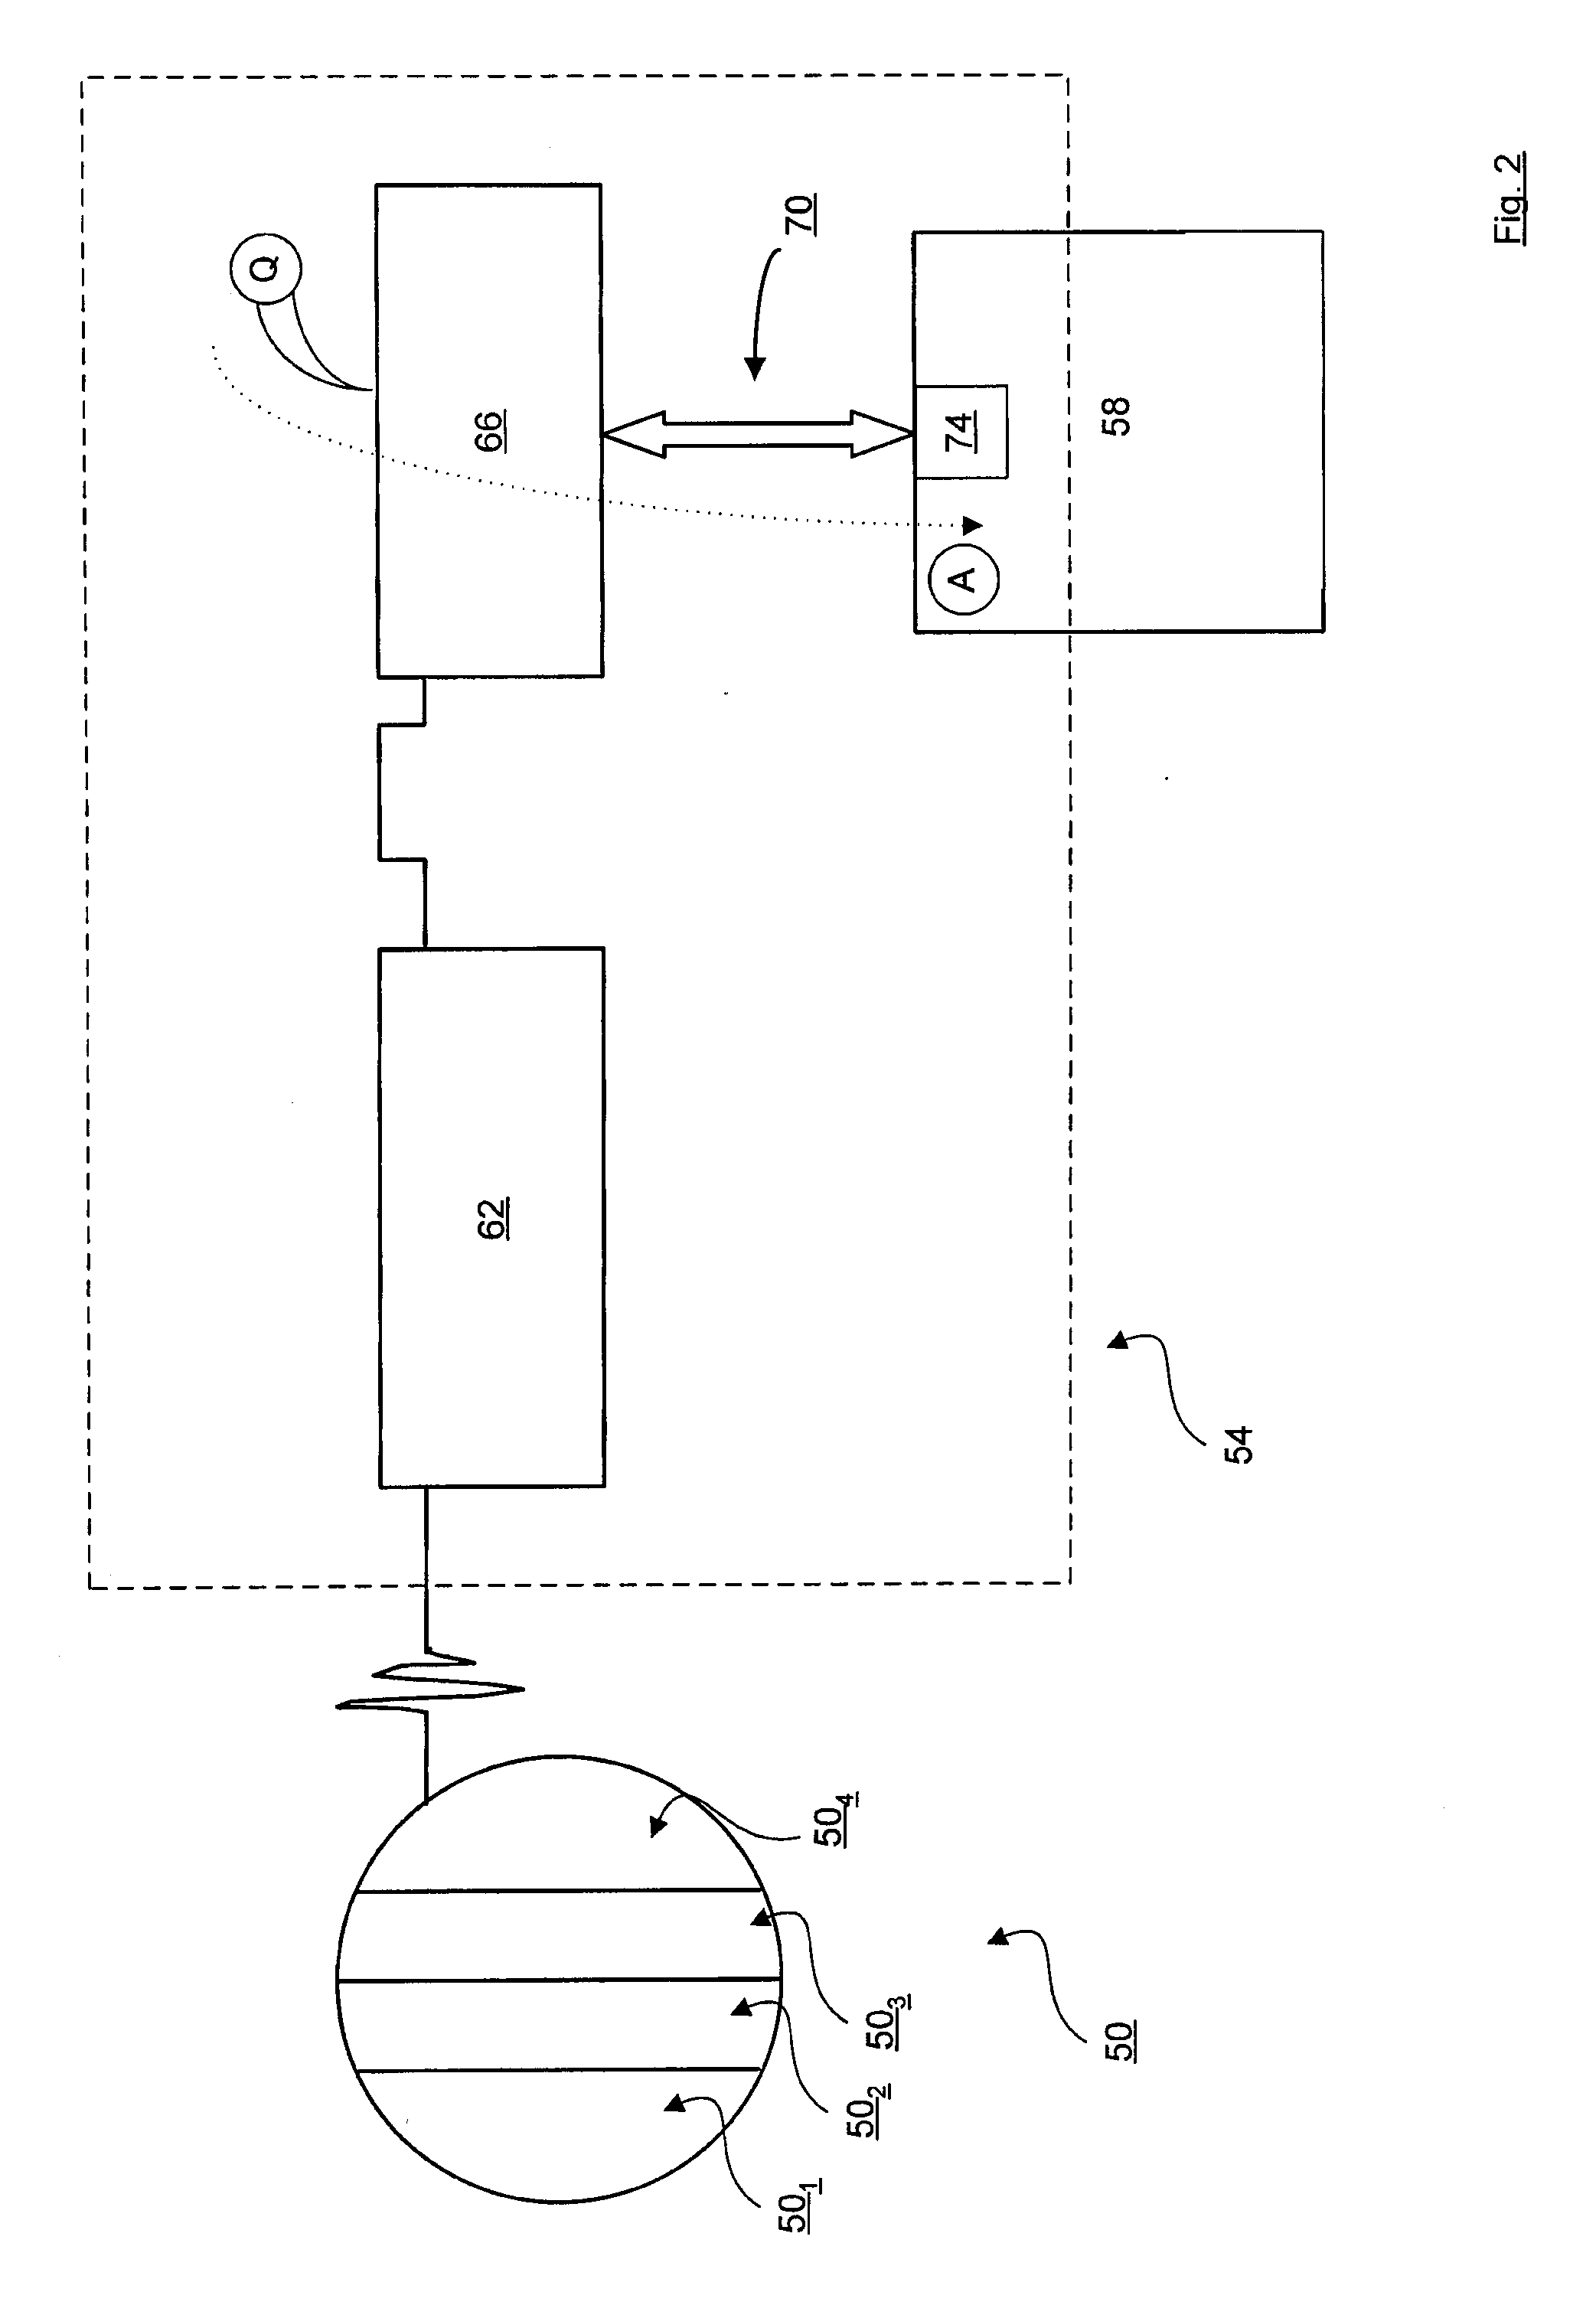 System and Method for Data Collection in Recursive Mass Analysis